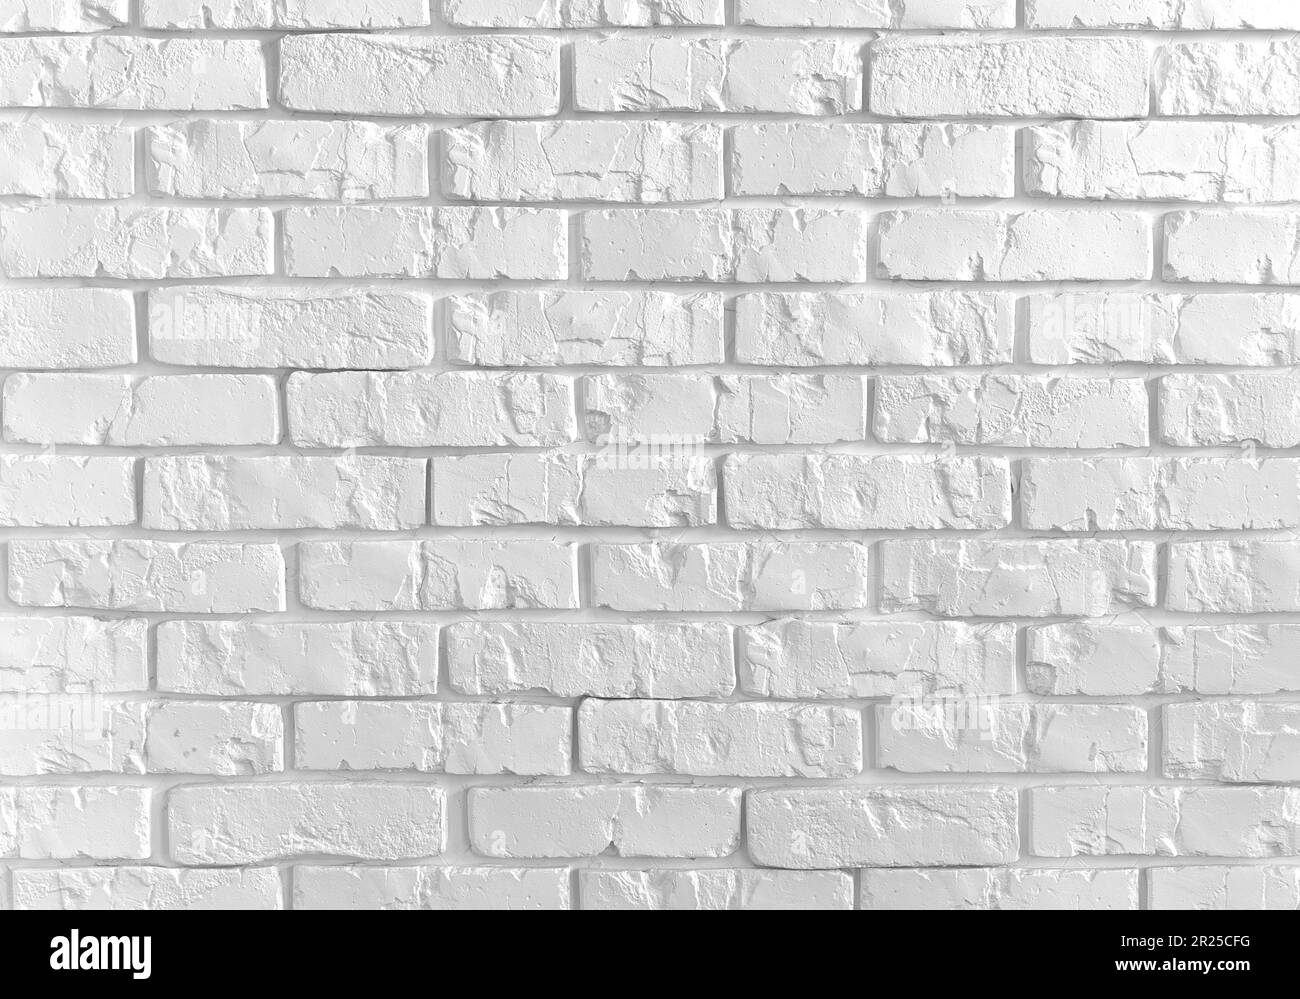 background of White brick wall with peeling plaster, stone texture. Concrete loft style design ideas living home. Place for design Stock Photo